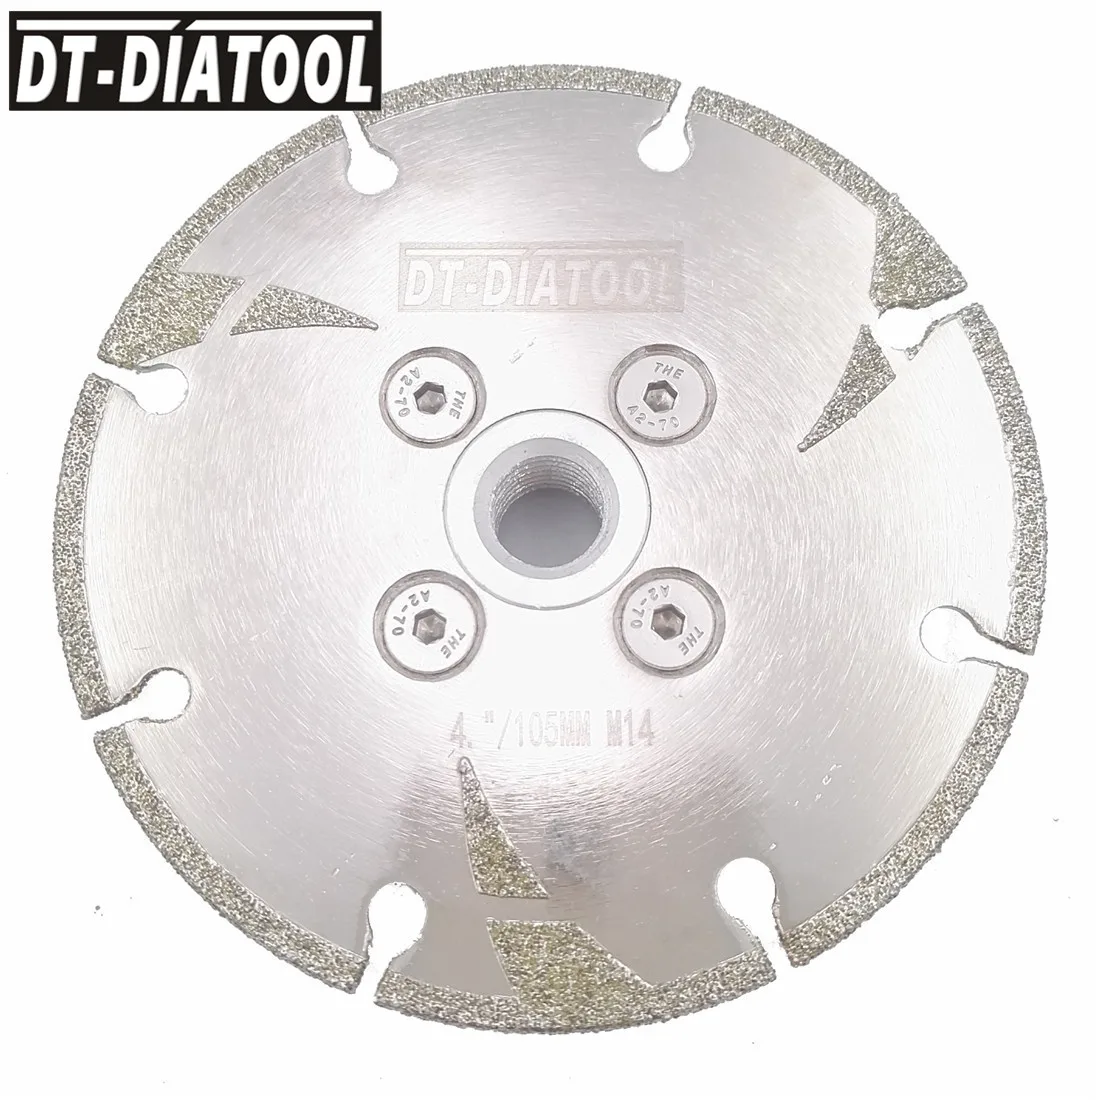 

DT-DIATOOL 1pc Electroplated Reinforced Diamond Cutting Disc Saw Blade Cutter M14 Thread Dia 4" 4.5" 5" for Marble Granite